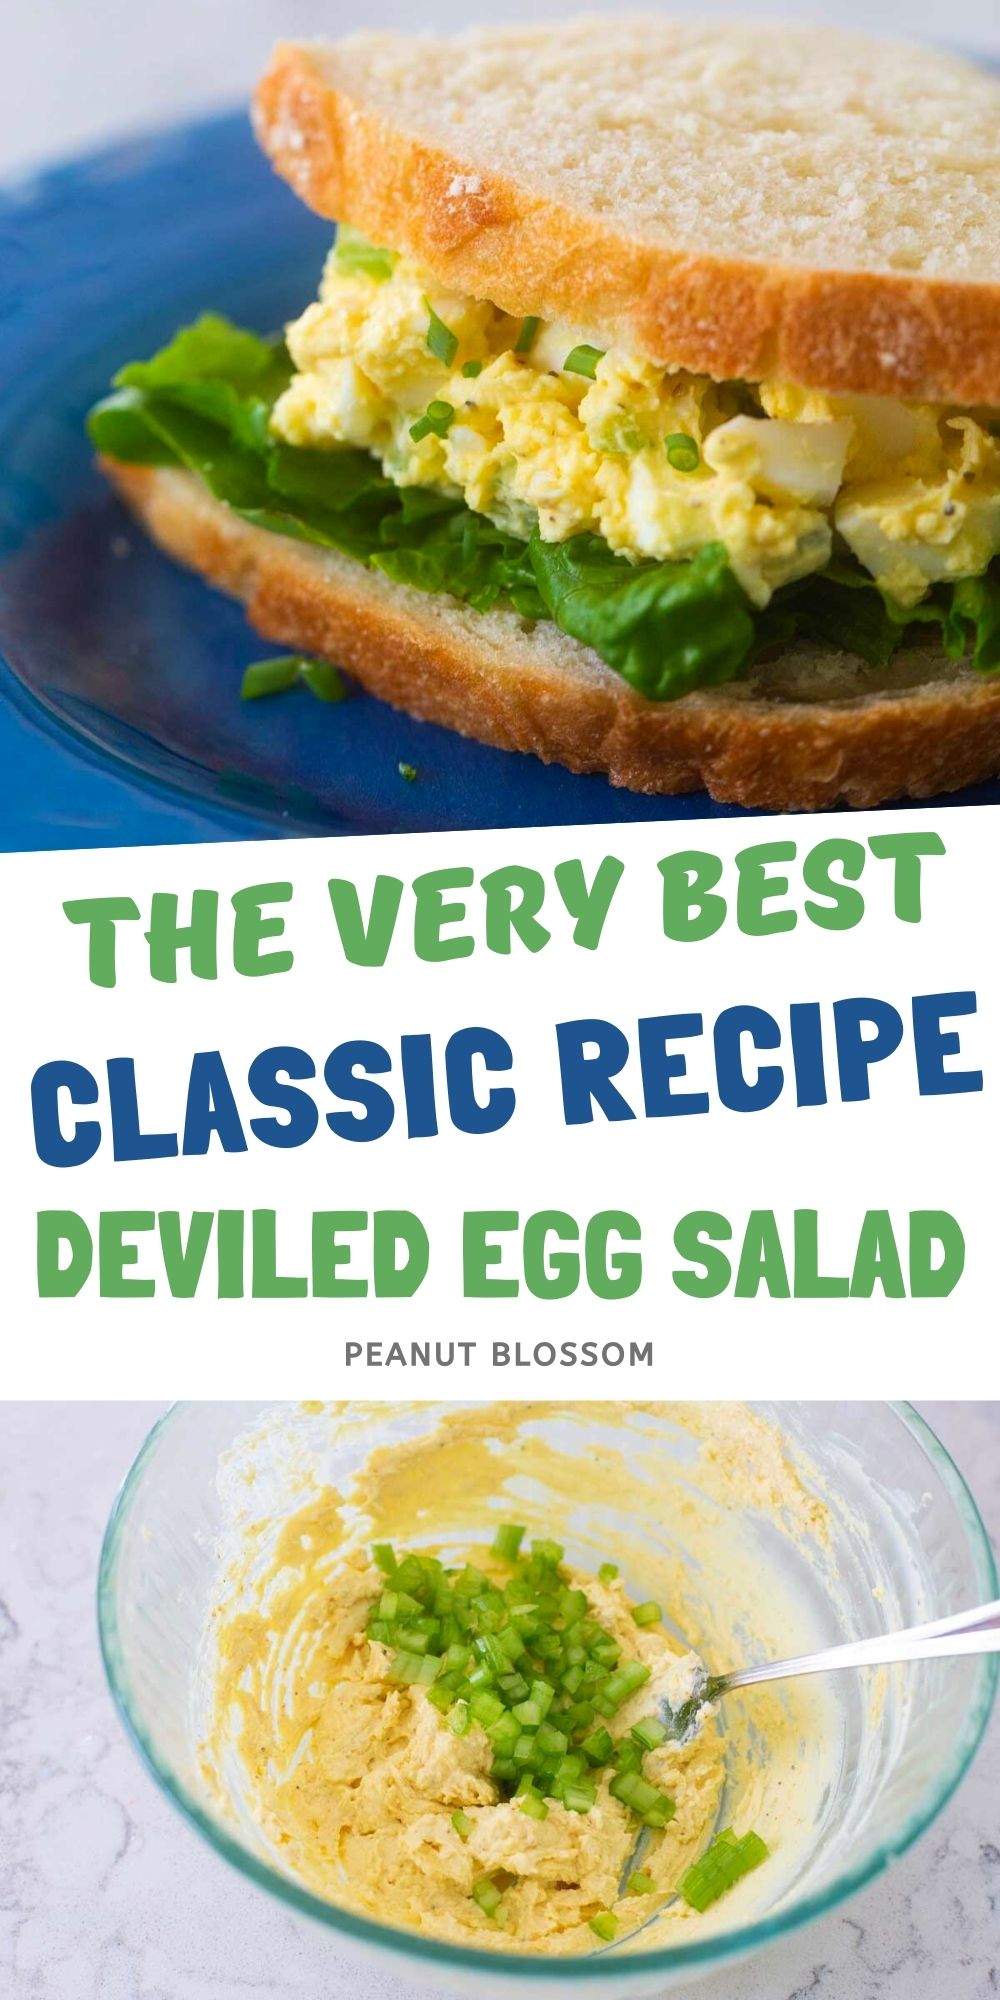 A photo collage shows the finished egg salad sandwich next to a mixing bowl of egg salad.